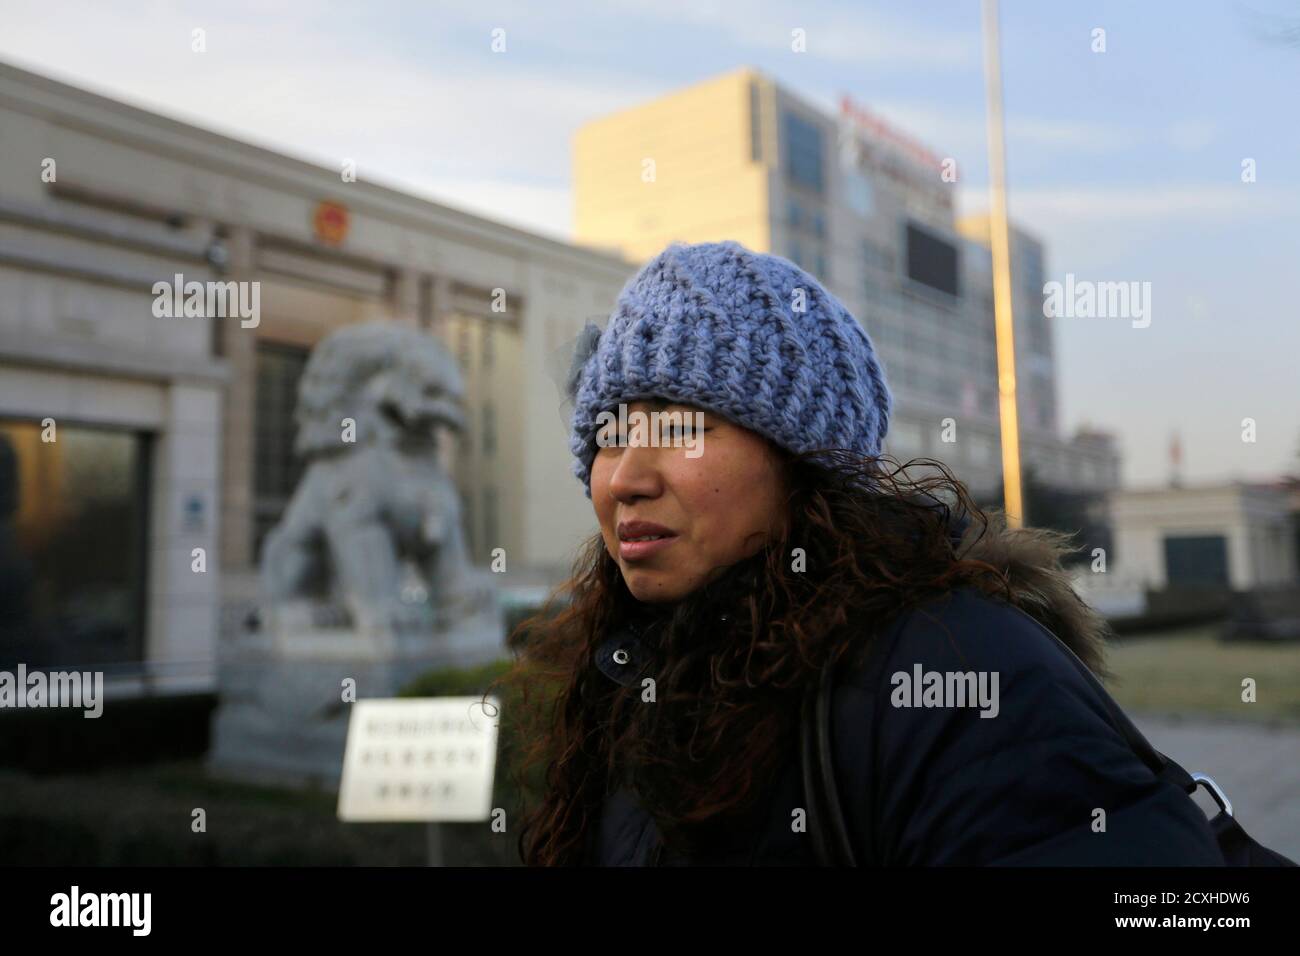 Liu Fei, 41-year-old warehouse worker, waits to enter a courthouse for a hearing in Fangshan, district of Beijing, December 6, 2013. Chinese warehouse worker Liu Fei was fined 330,000 yuan ($54,200), or 14 times her yearly wage, for having a second child and her failure to pay means the boy has no access to basic rights like schooling and healthcare. Liu's desperation prompted a fruitless attempt to sell her kidney and her eight-year-old boy's plea to sell his instead. Their dilemma has now triggered a rare legal battle against the police for denying the boy a 'hukou' - household registration  Stock Photo